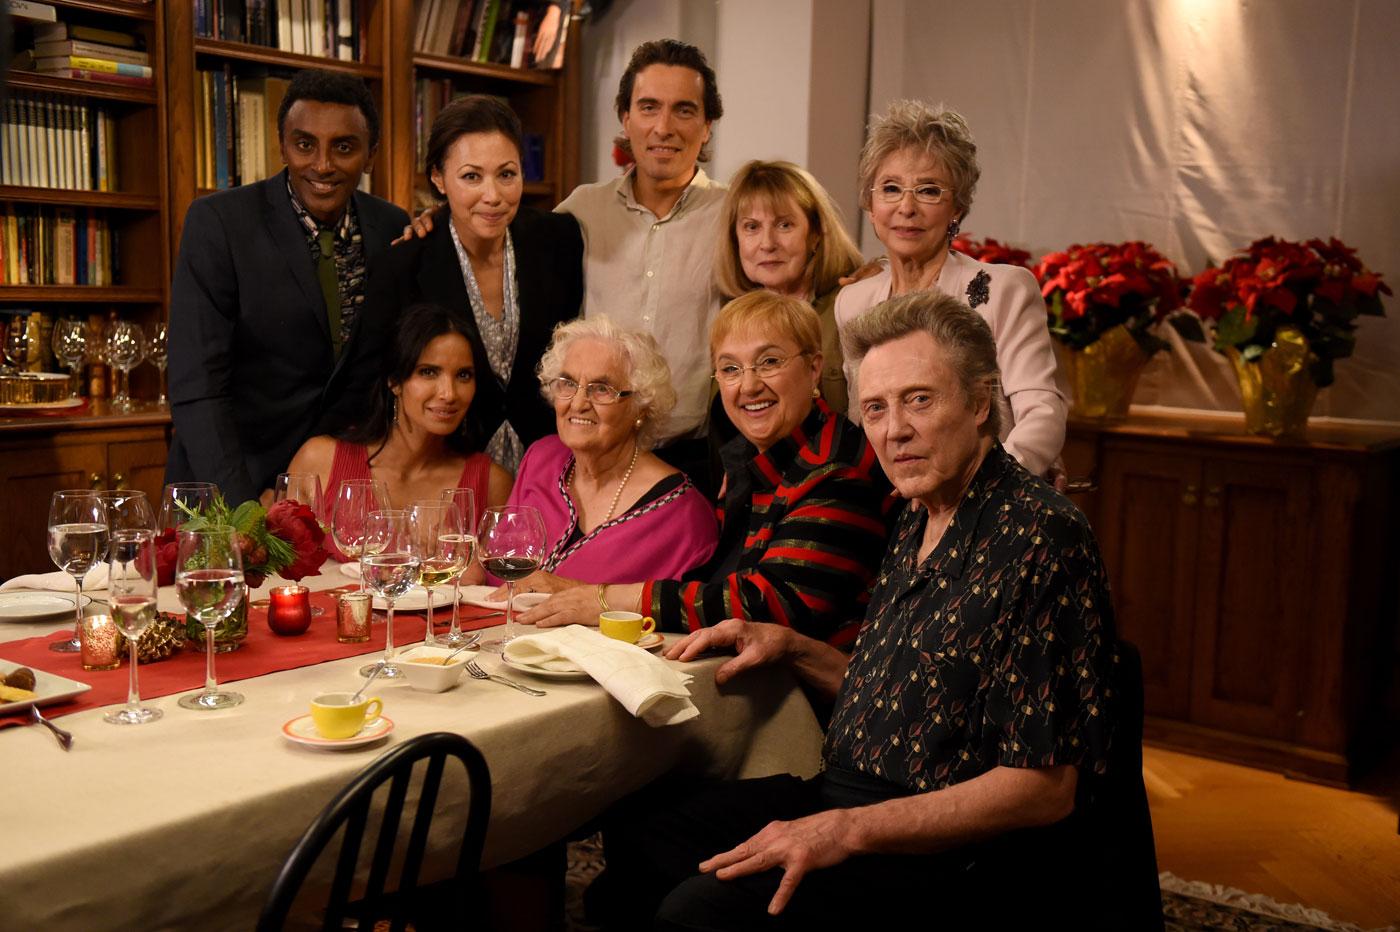 A Christmas meal at Lidia's table in Lidia Celebrates America: Home for the Holidays. (Courtesy of Meredith Nierman)